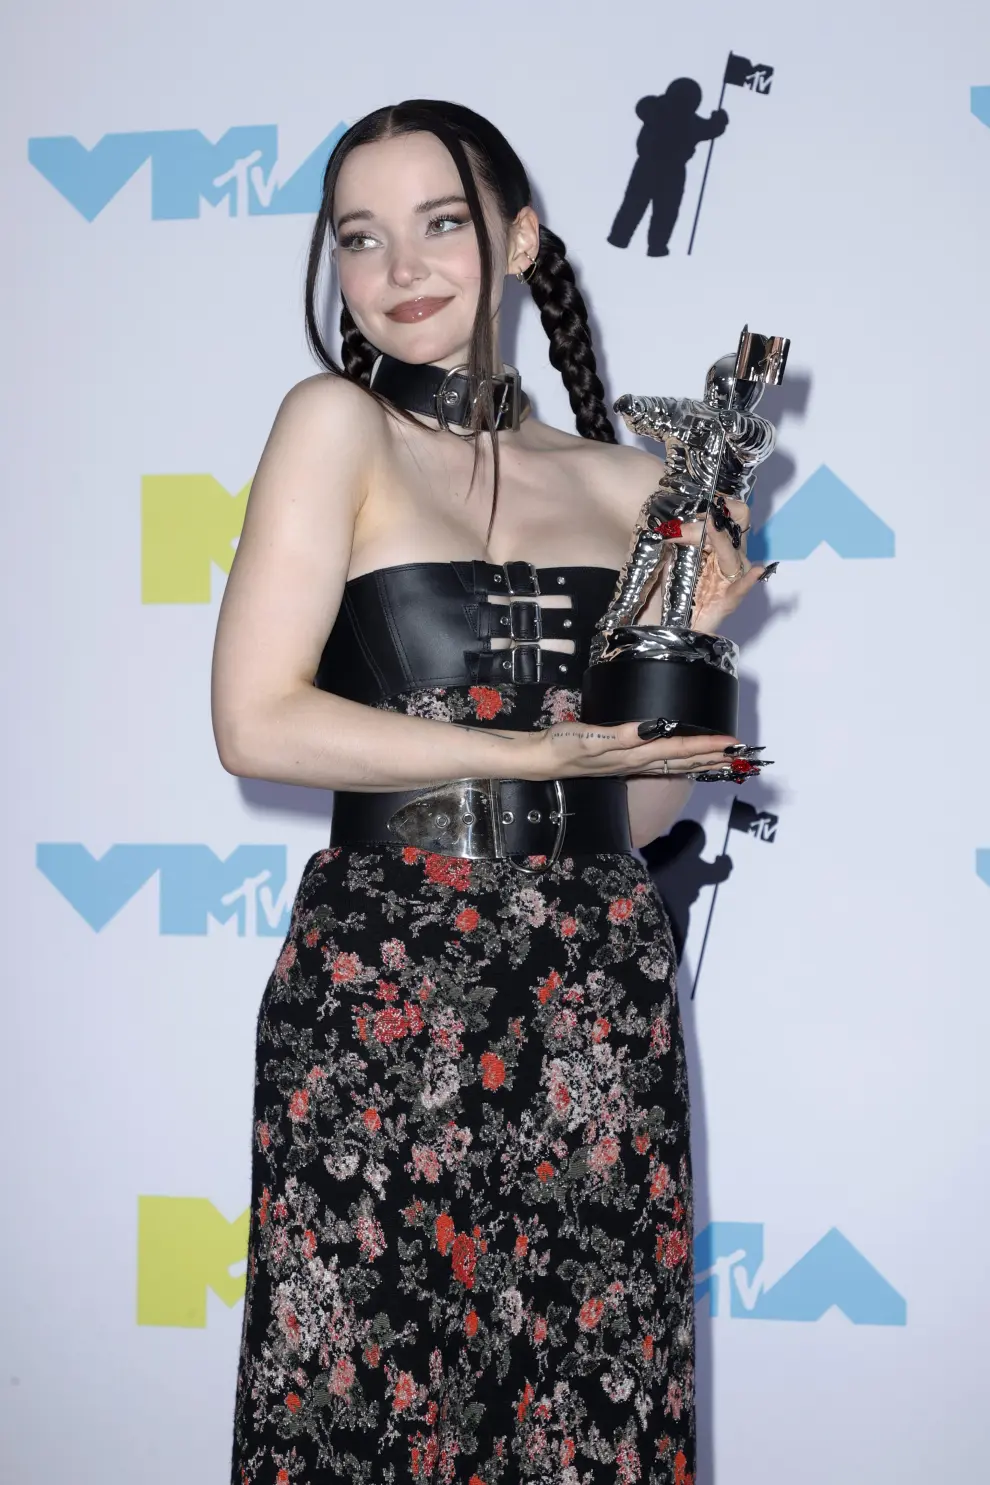 Diamond Kuts arrives at the 2022 MTV Video Music Awards at the Prudential Center in Newark, New Jersey, U.S., August 28, 2022. REUTERS/Caitlin Ochs AWARDS-MTV/VMA